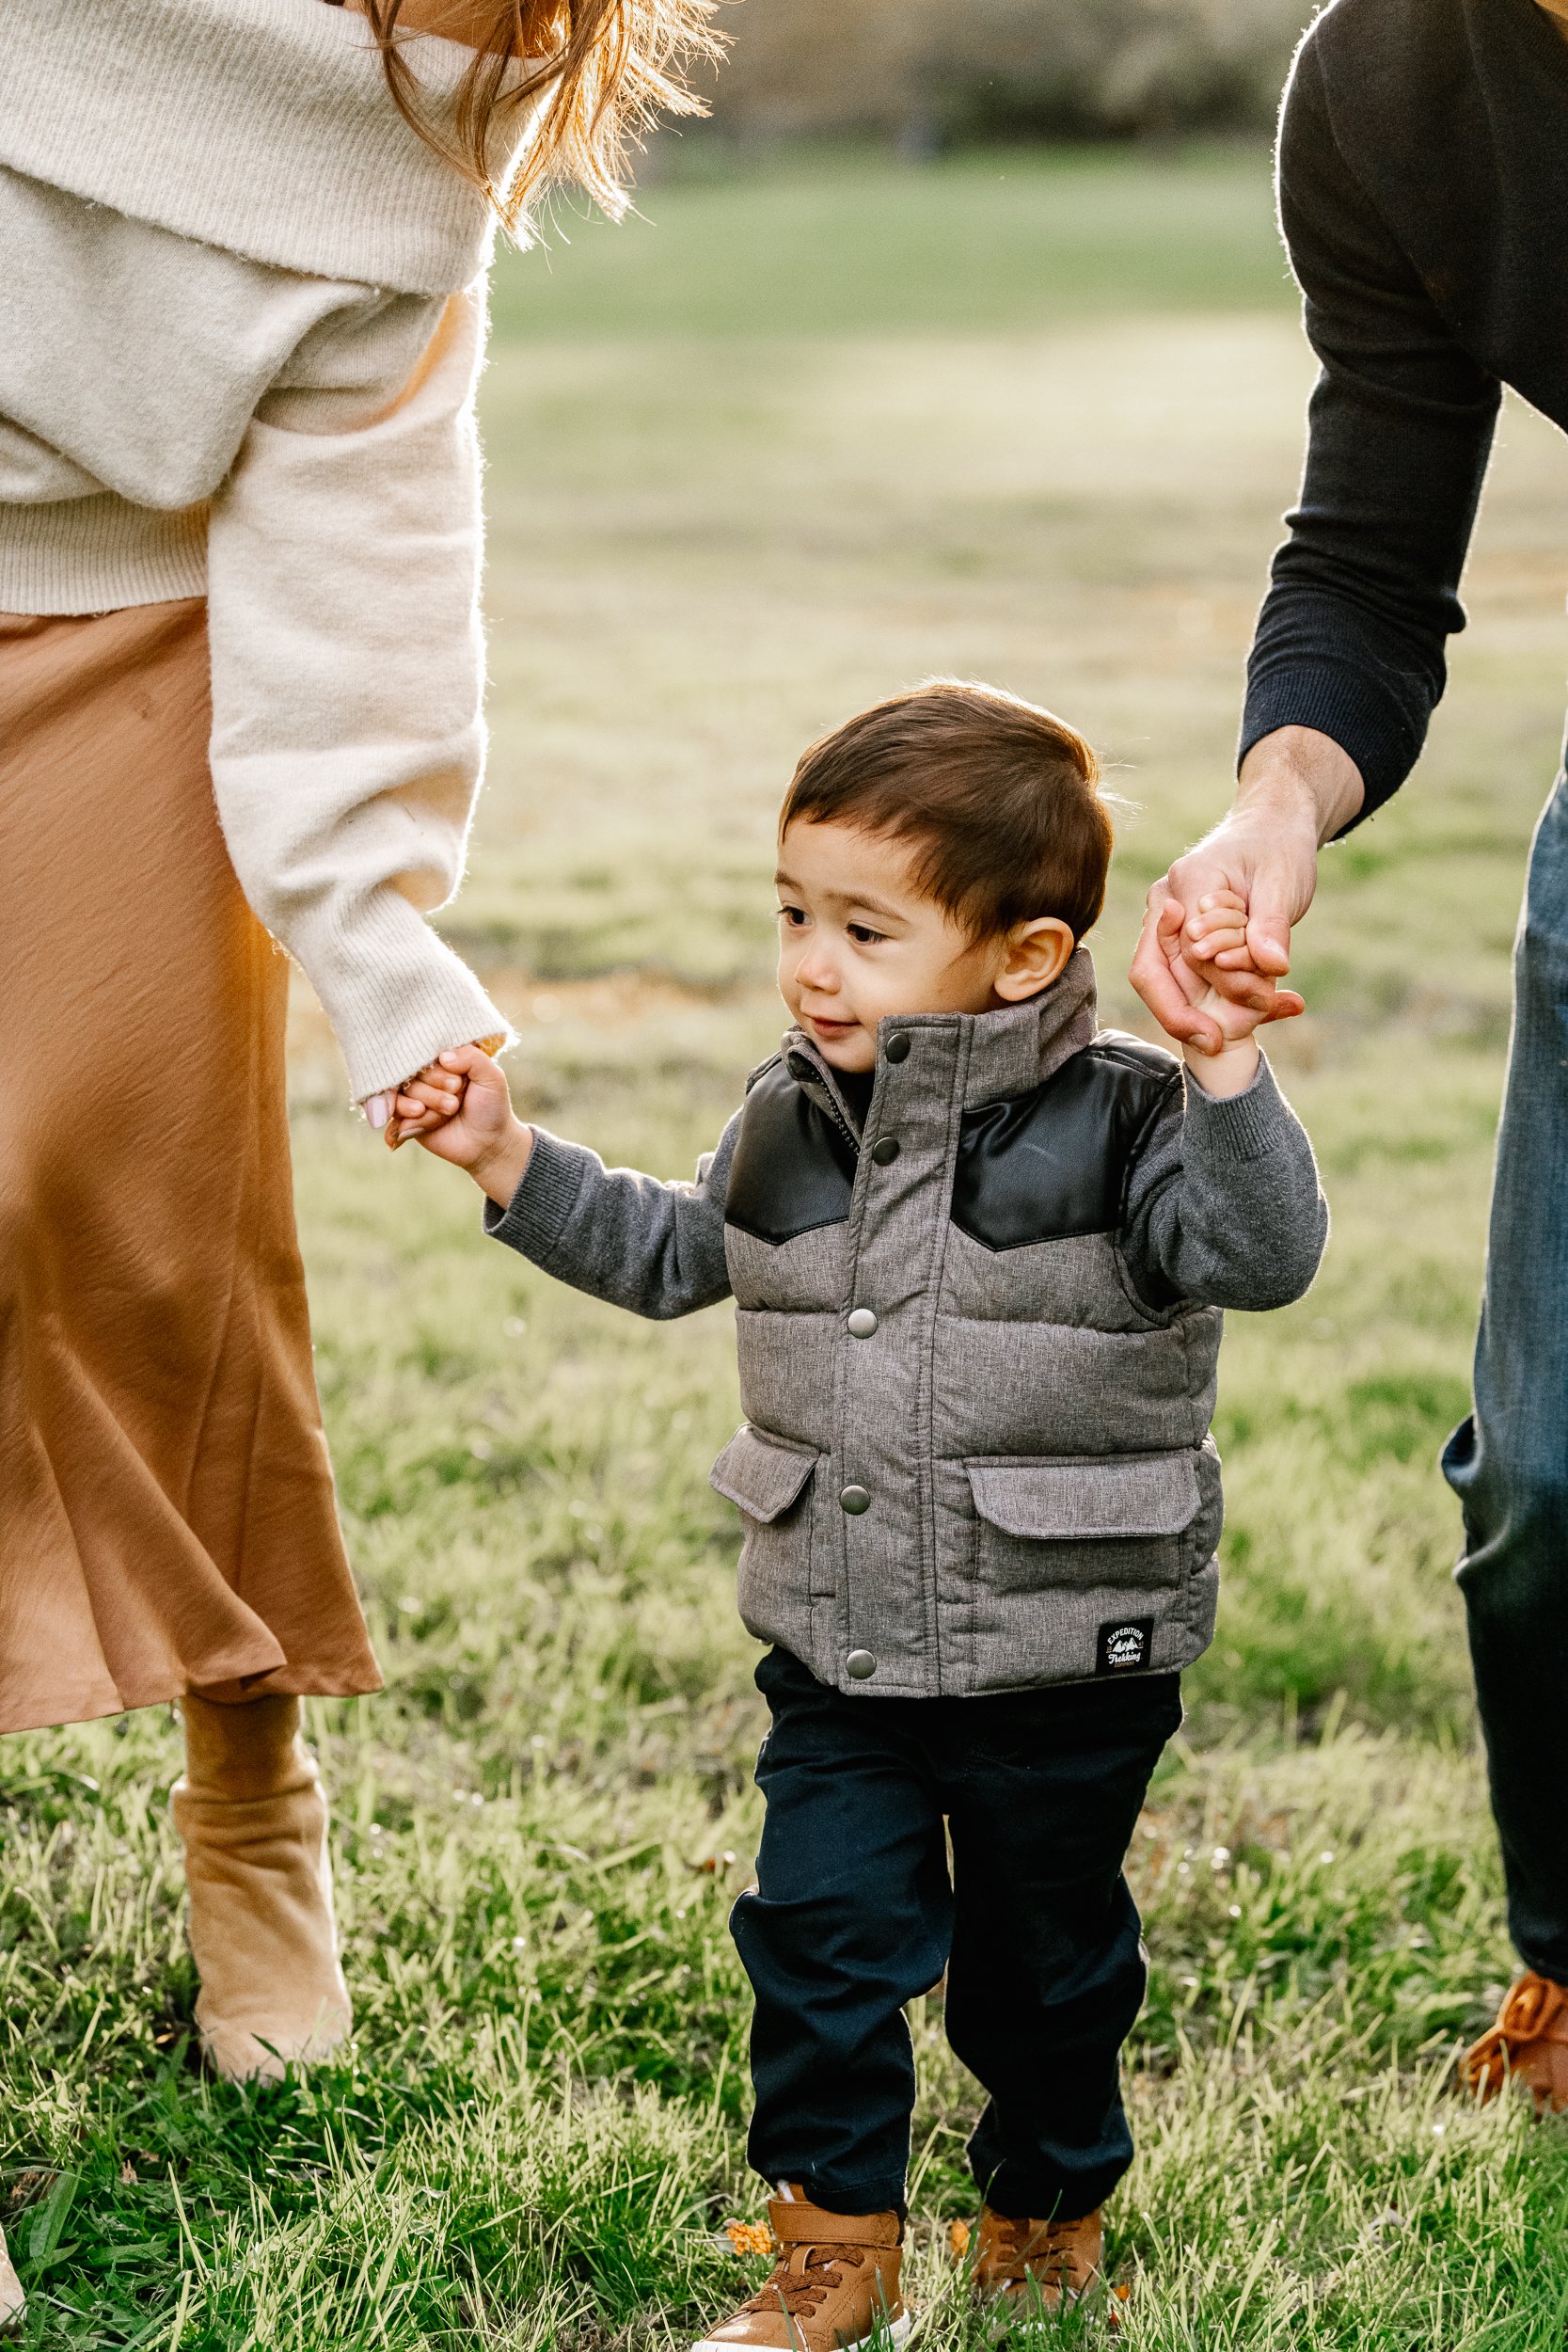  During fall time in New Jersey, a young boy wearing black and gray holds his parent's hands in a green grass field by Nicole Hawkins Photography. boy in black and gray green grass field outdoor New Jersey family pictures #nicolehawkinsphotography #n